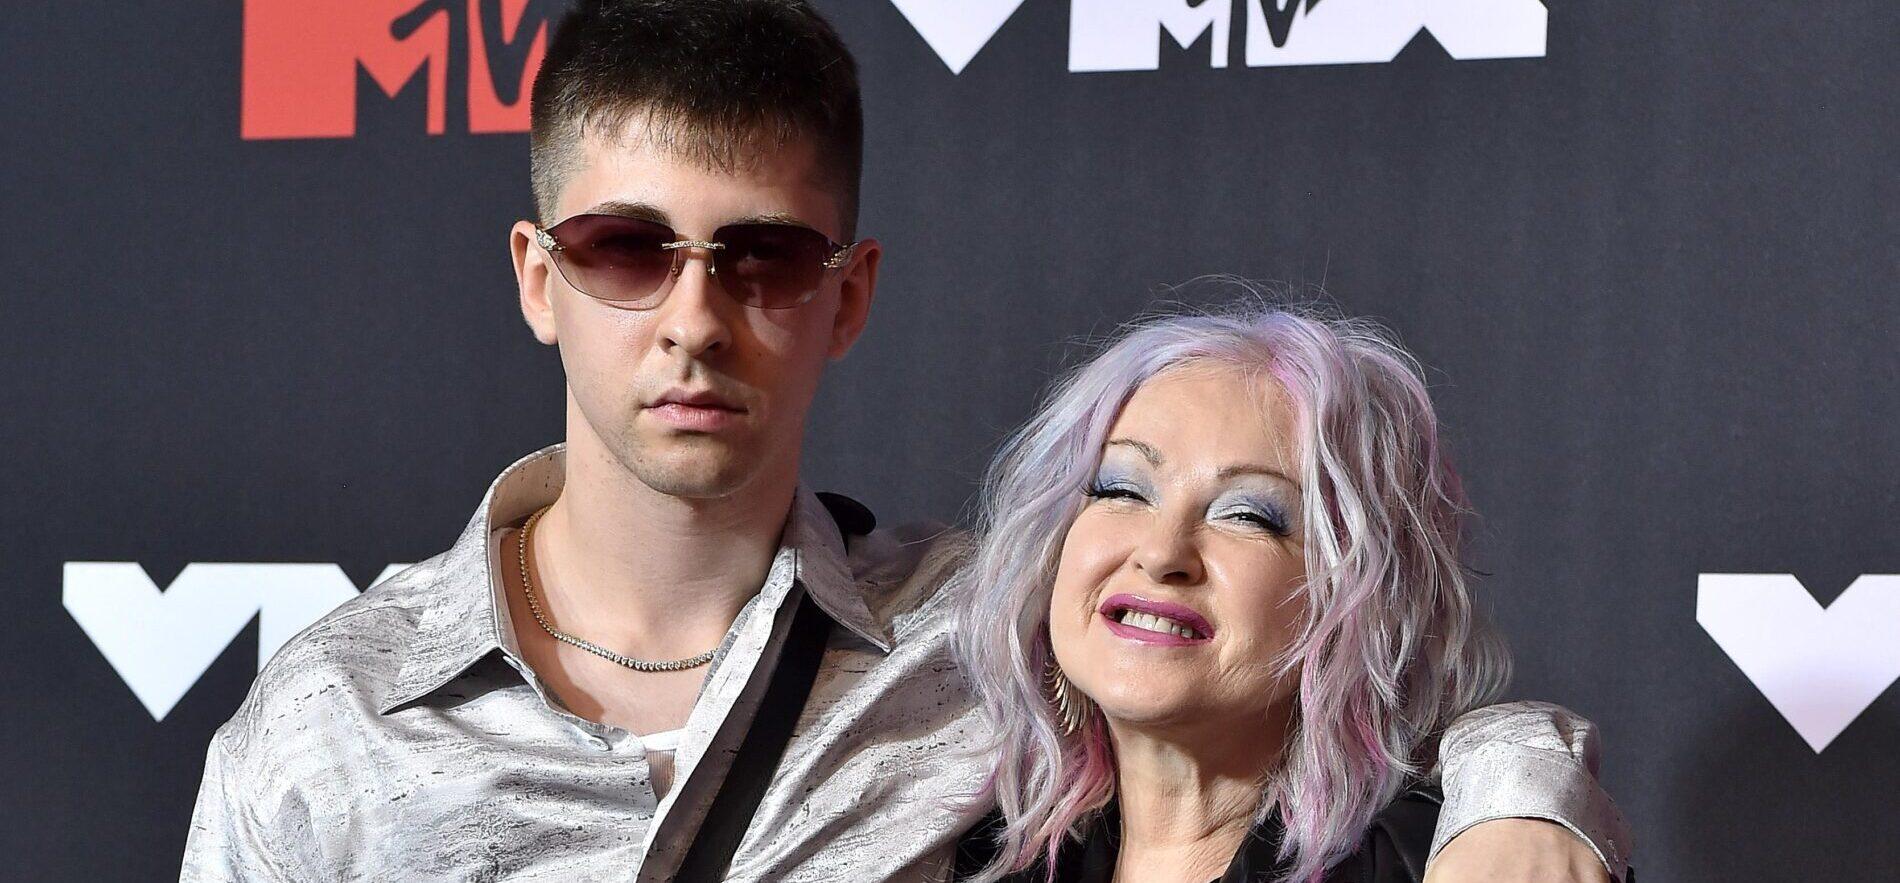 Cyndi Lauper's Son Arrested And Charged With Gun Possession